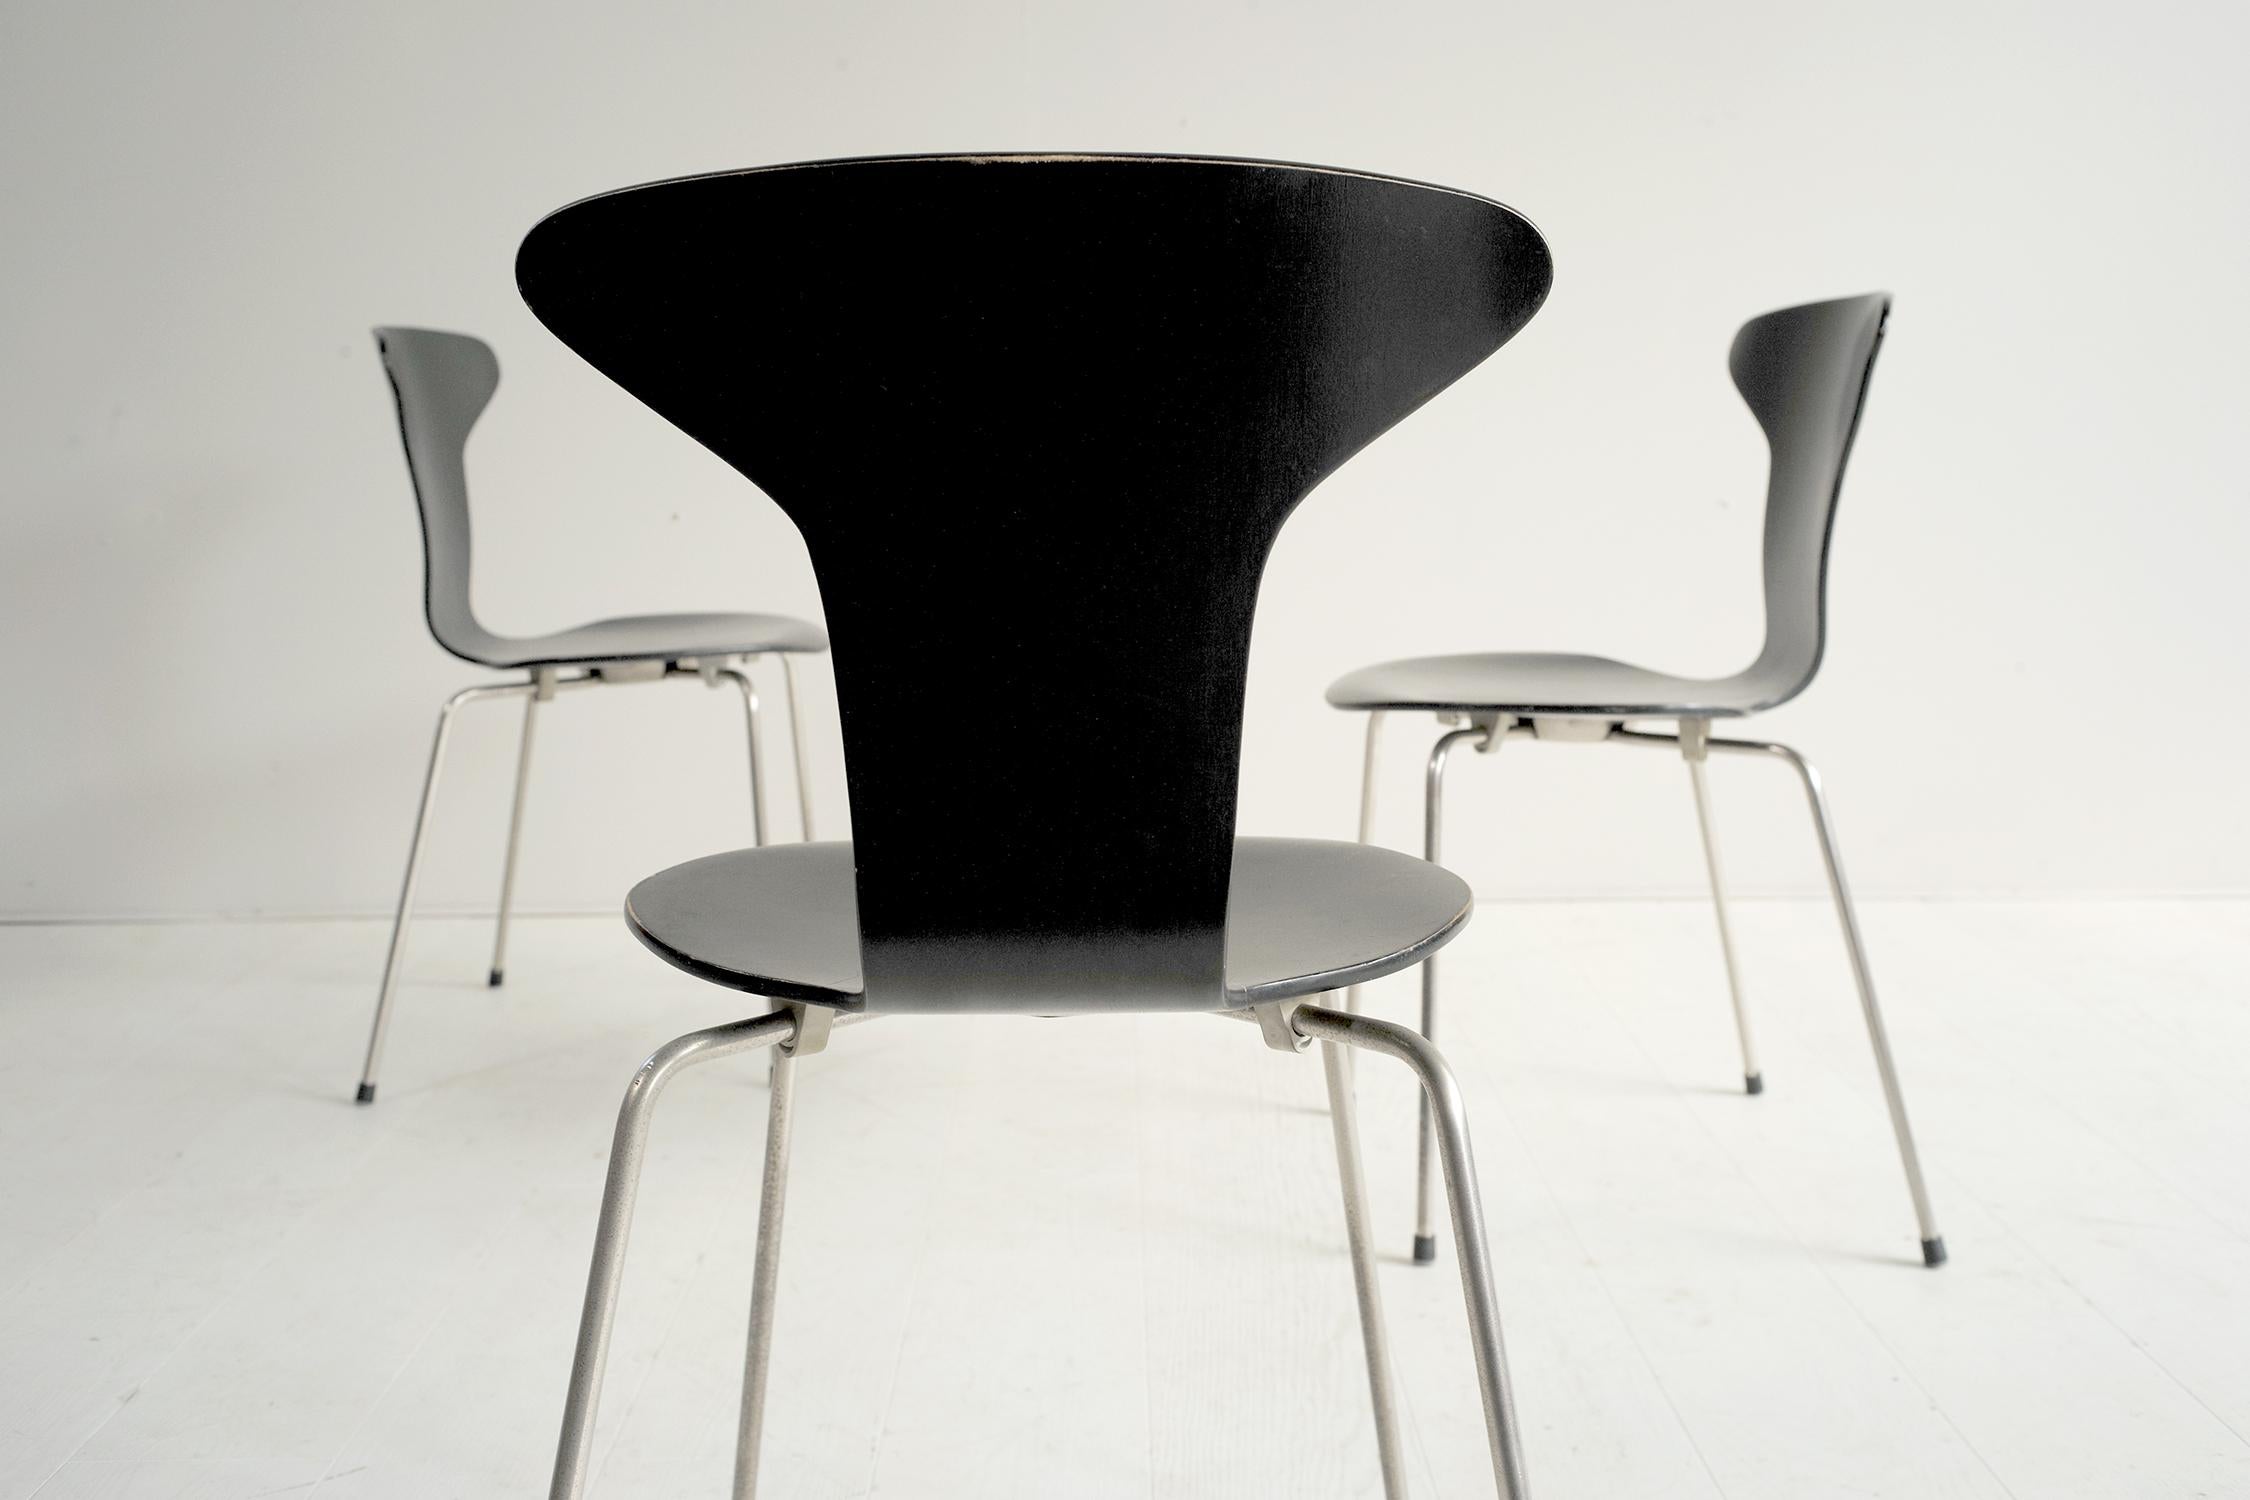 Set of 3 chairs No. 3105 by Arne Jacobsen for Fritz Hansen, Denmark, 1955. This is the first edition of this chair nicknamed 